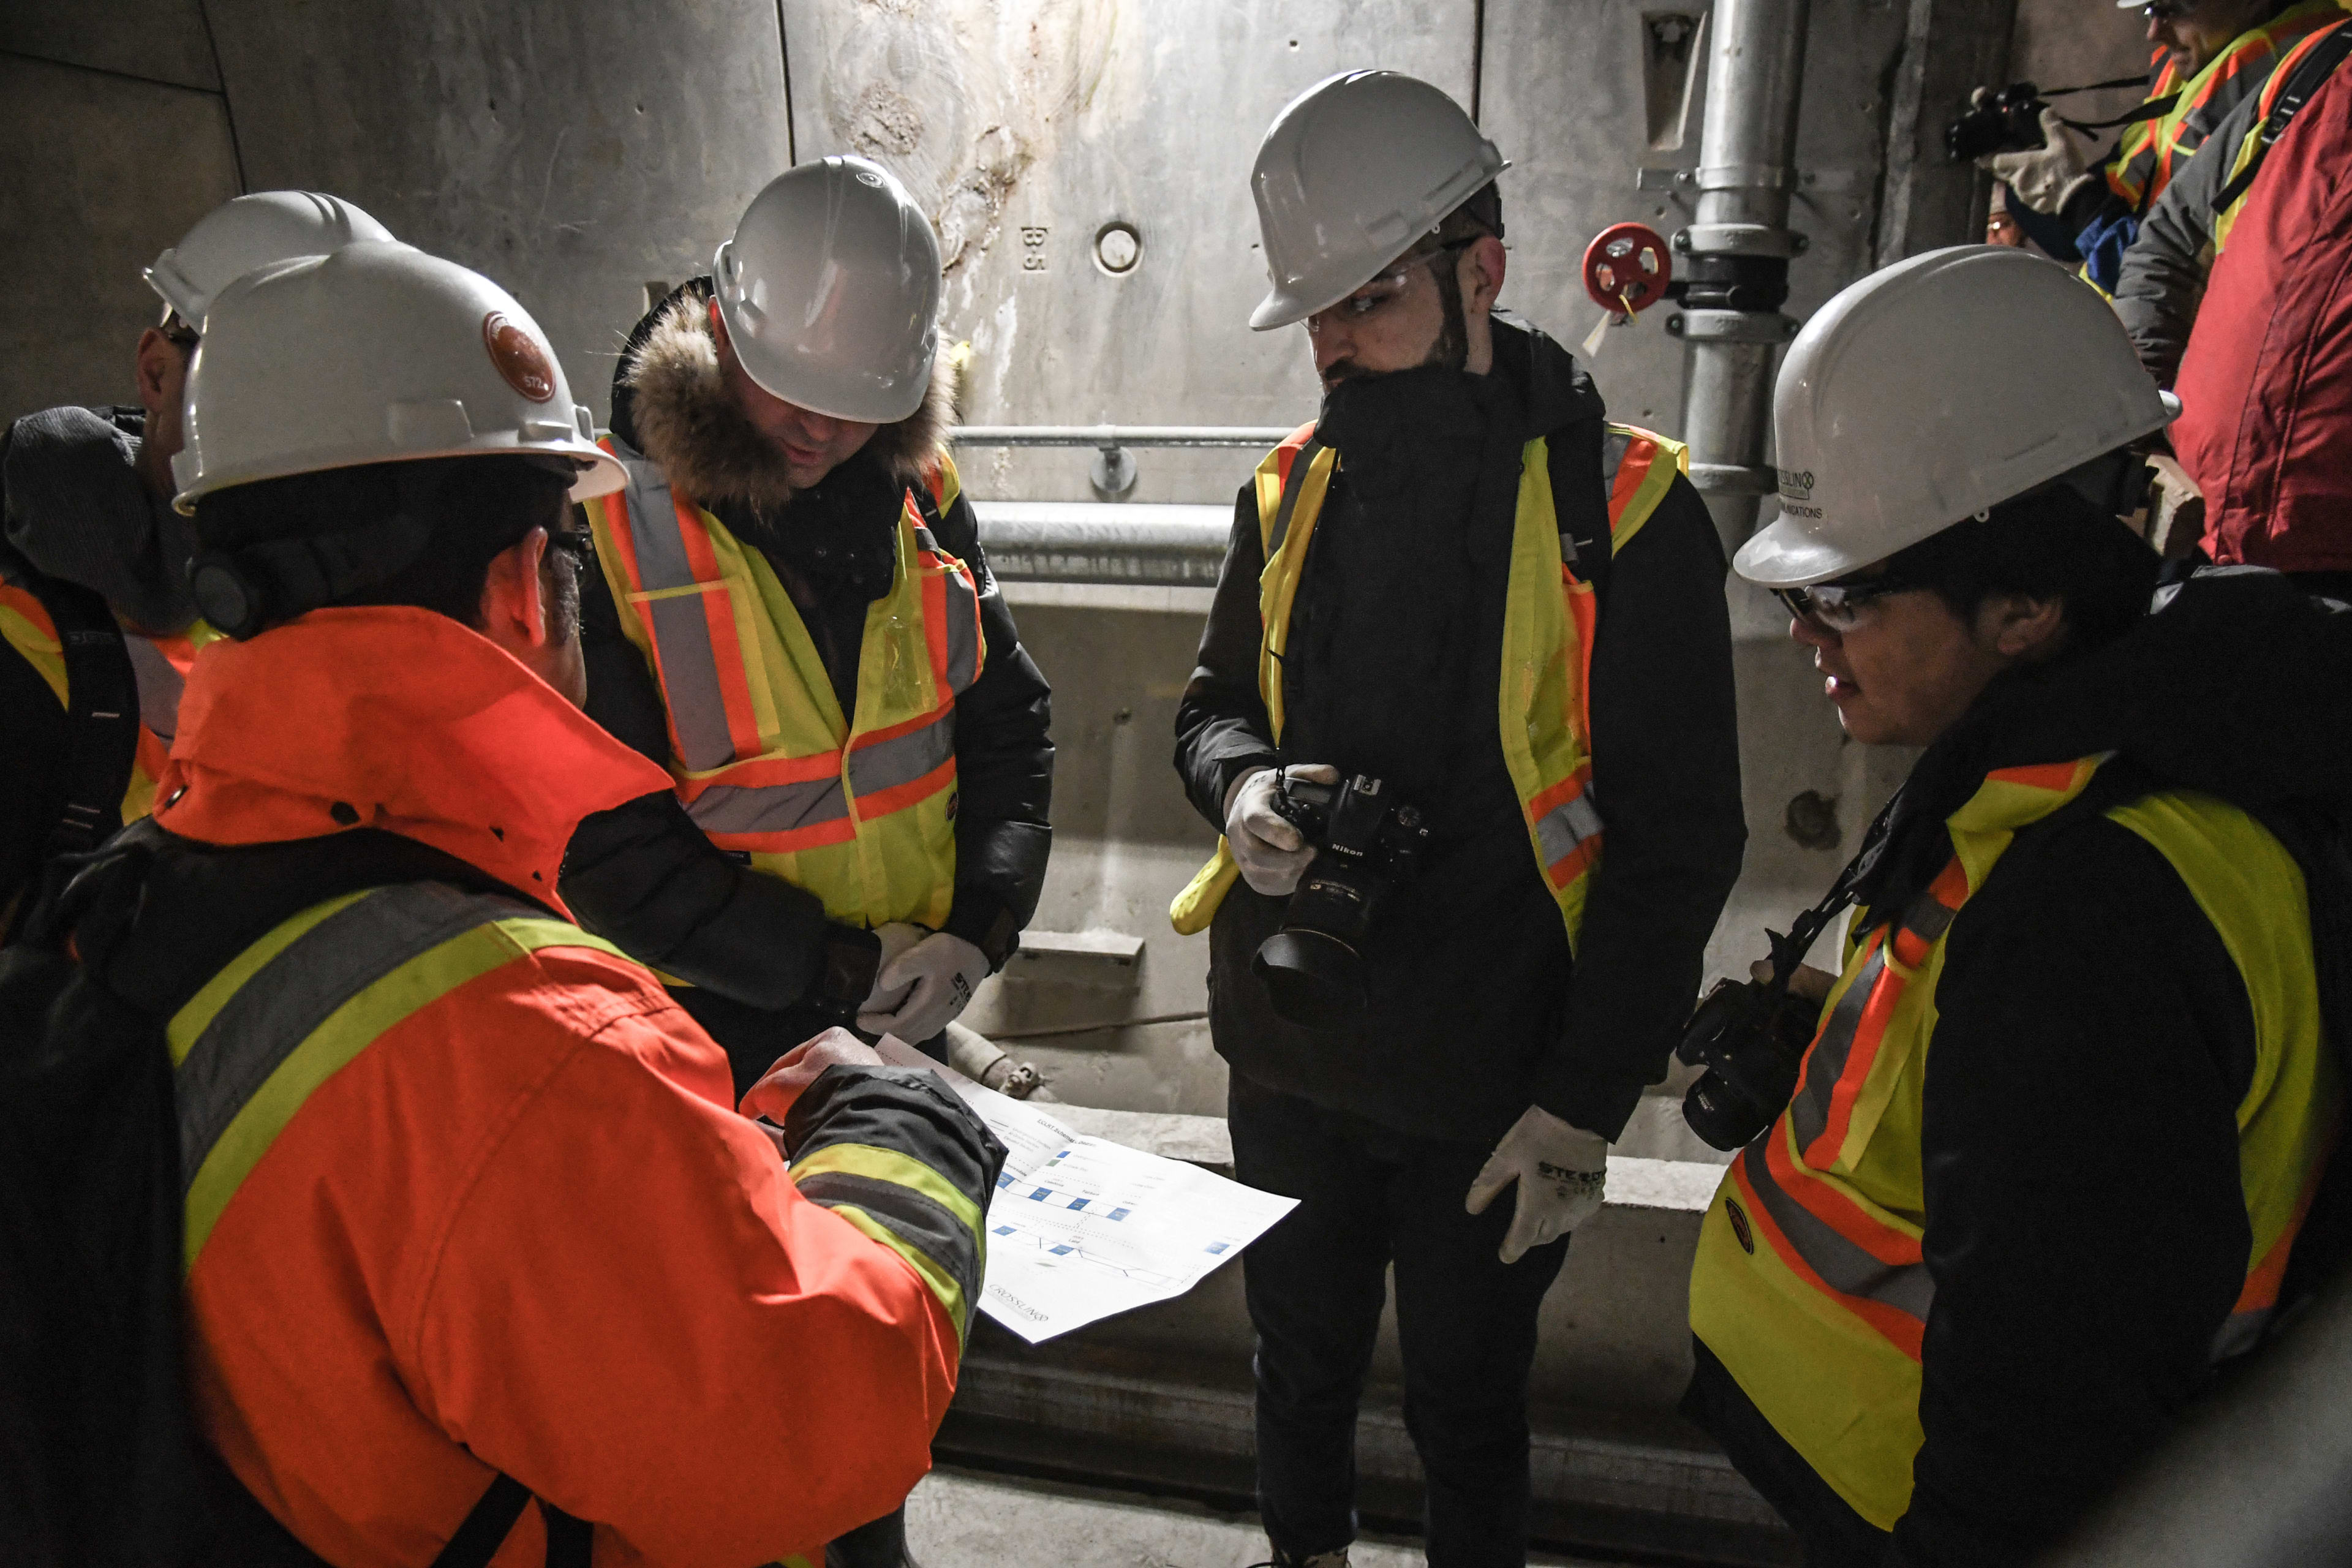 Five people, all with hardhats and vests, look down at paperwork.